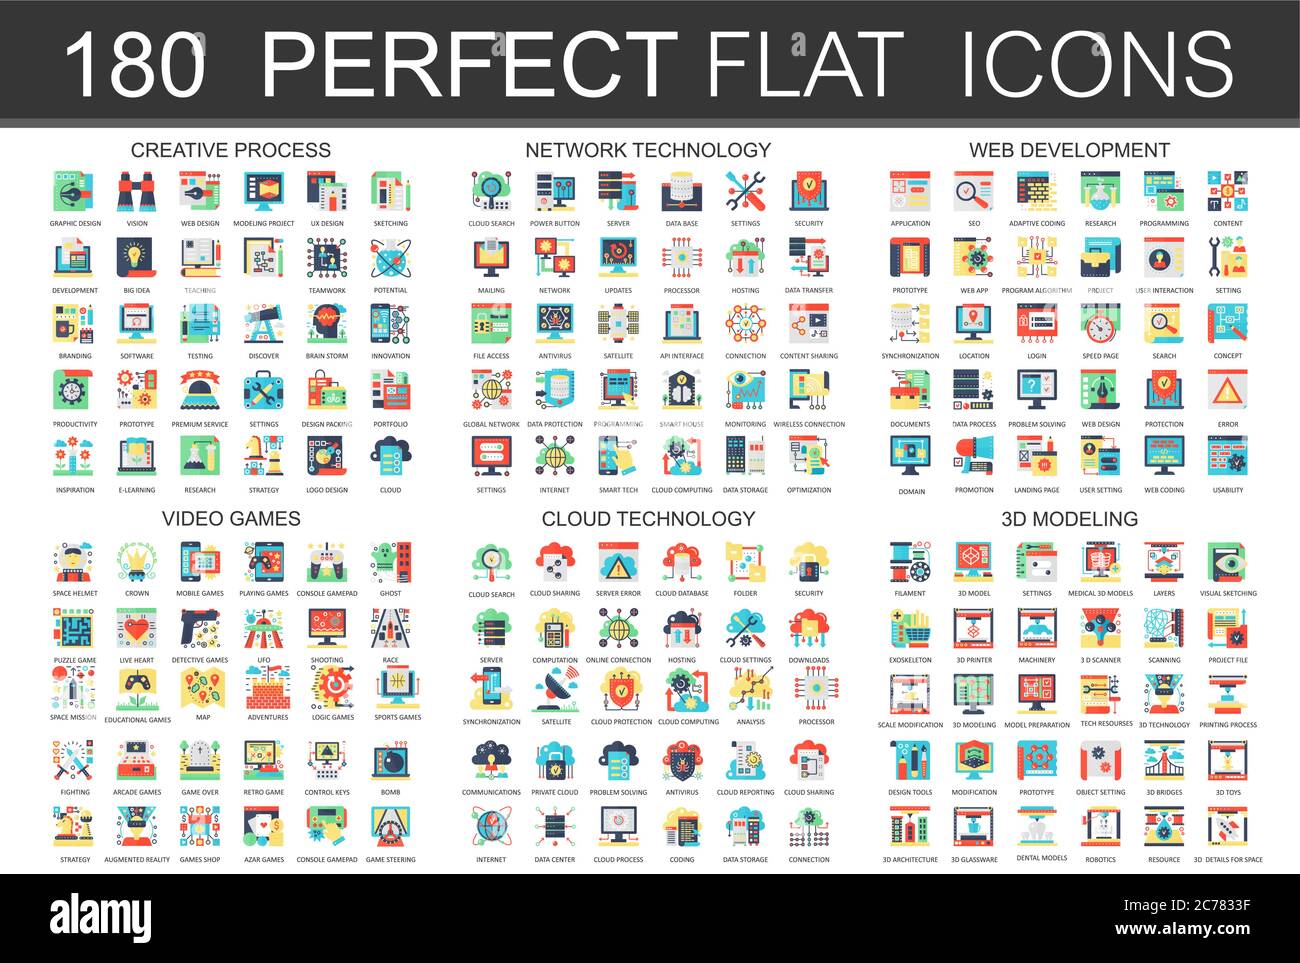 180 vector complex flat icons concept symbols of creative process, network technology, web development, video games, cloud technology, 3d modeling. Web infographic icon design Stock Vector